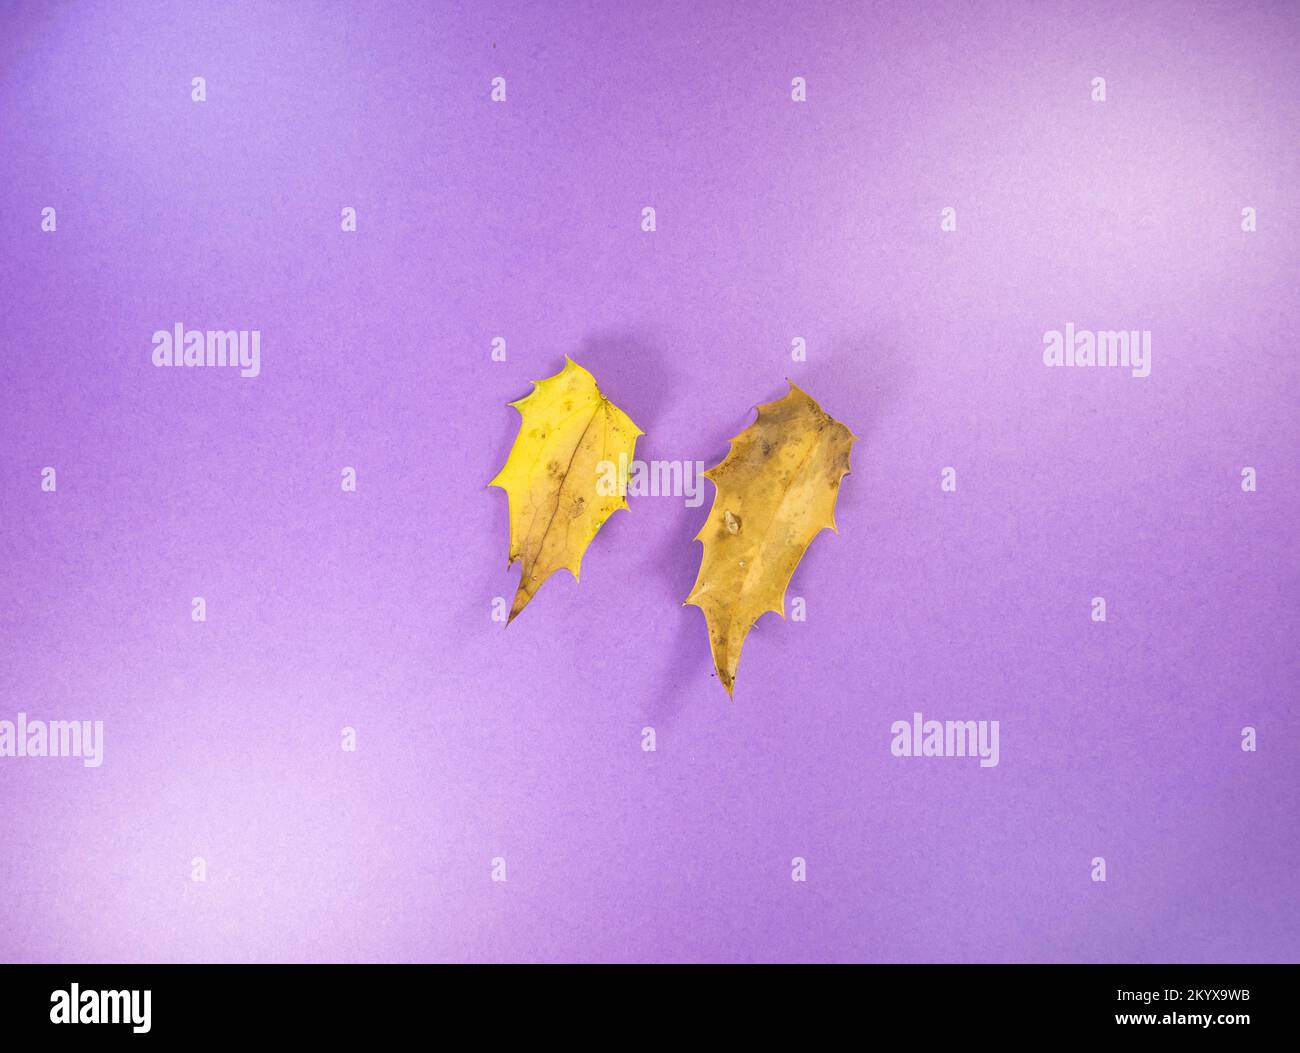 two brown Autumn Holly or Ilex leaf isolated on a purple background Autumn Holly or Ilex leaf isolated on a purple background Stock Photo